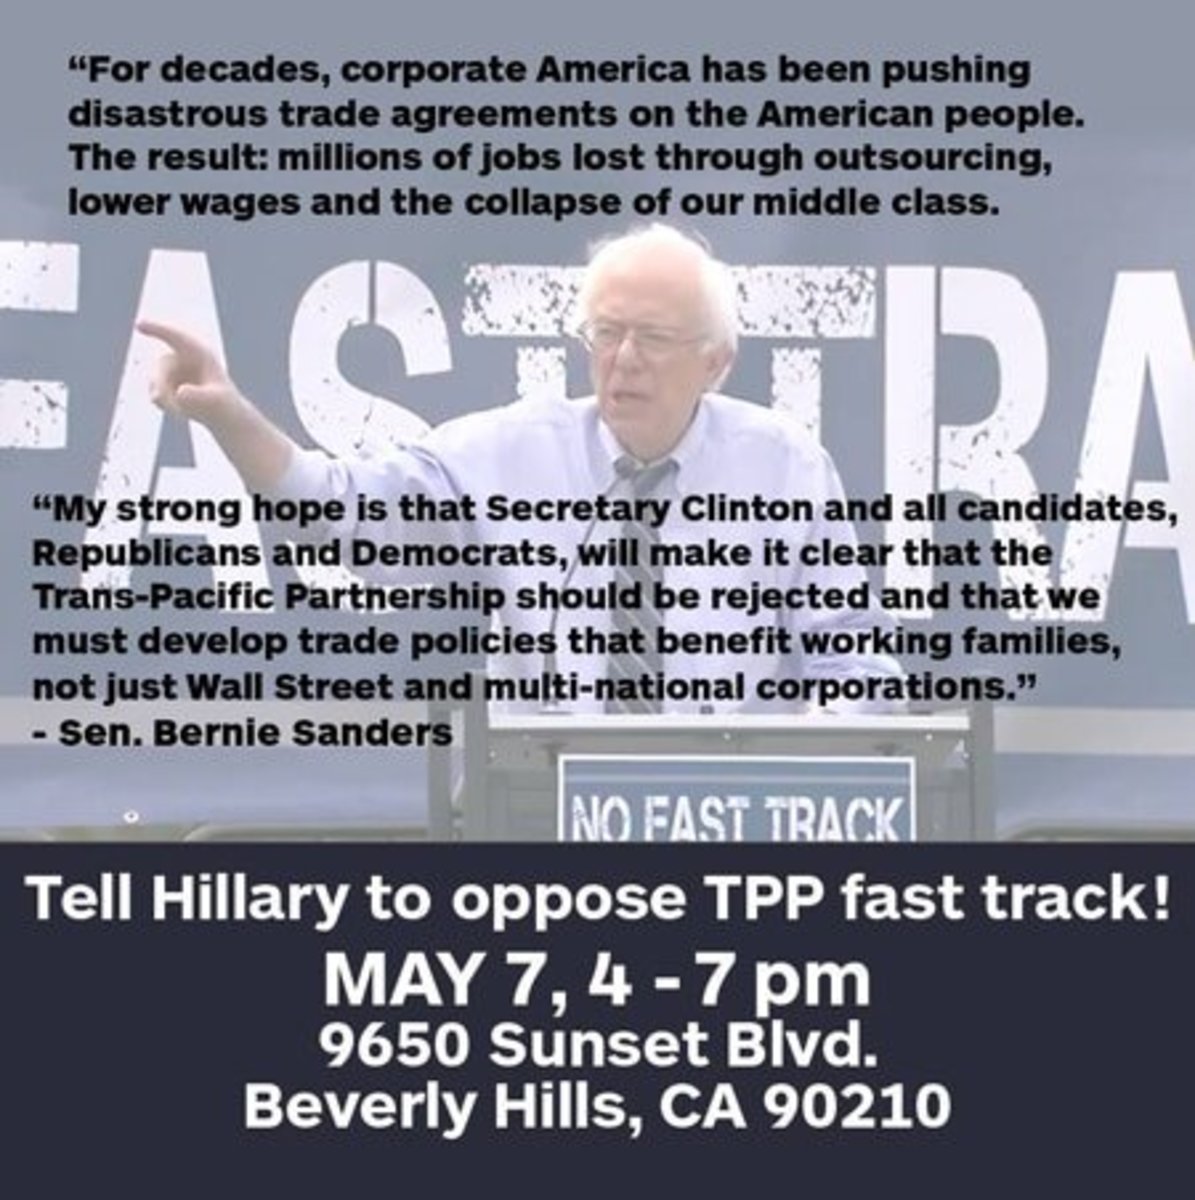 Tell Hillary to Oppose TPP